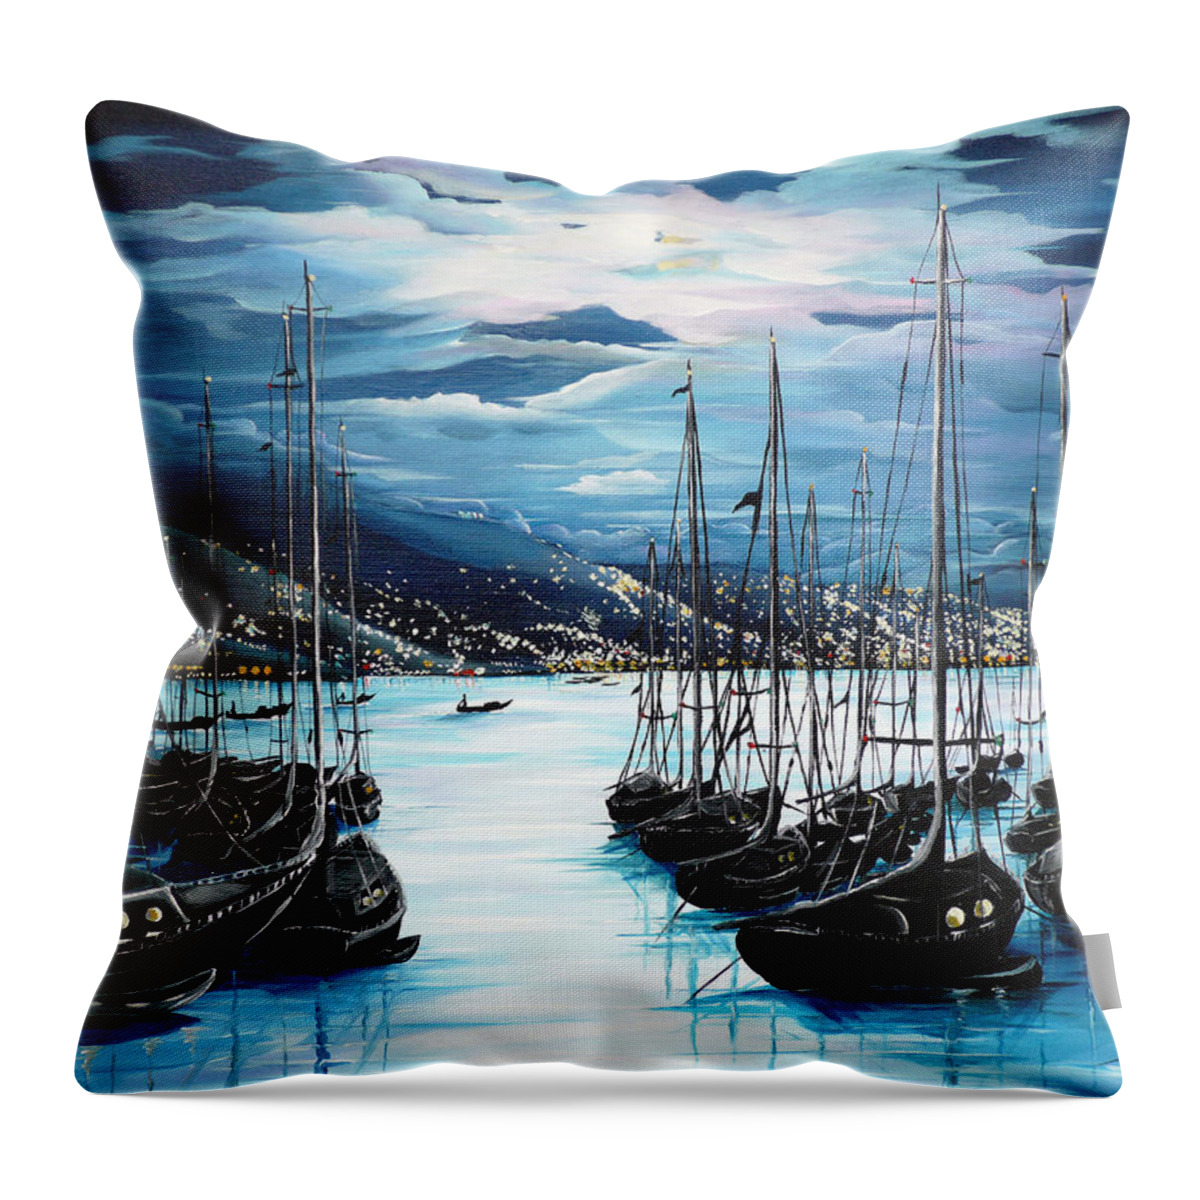 Ocean Painting  Caribbean Seascape Painting Moonlight Painting Yachts Painting Marina Moonlight Port Of Spain Trinidad And Tobago Painting Greeting Card Painting Throw Pillow featuring the painting Moonlight Over Port Of Spain by Karin Dawn Kelshall- Best